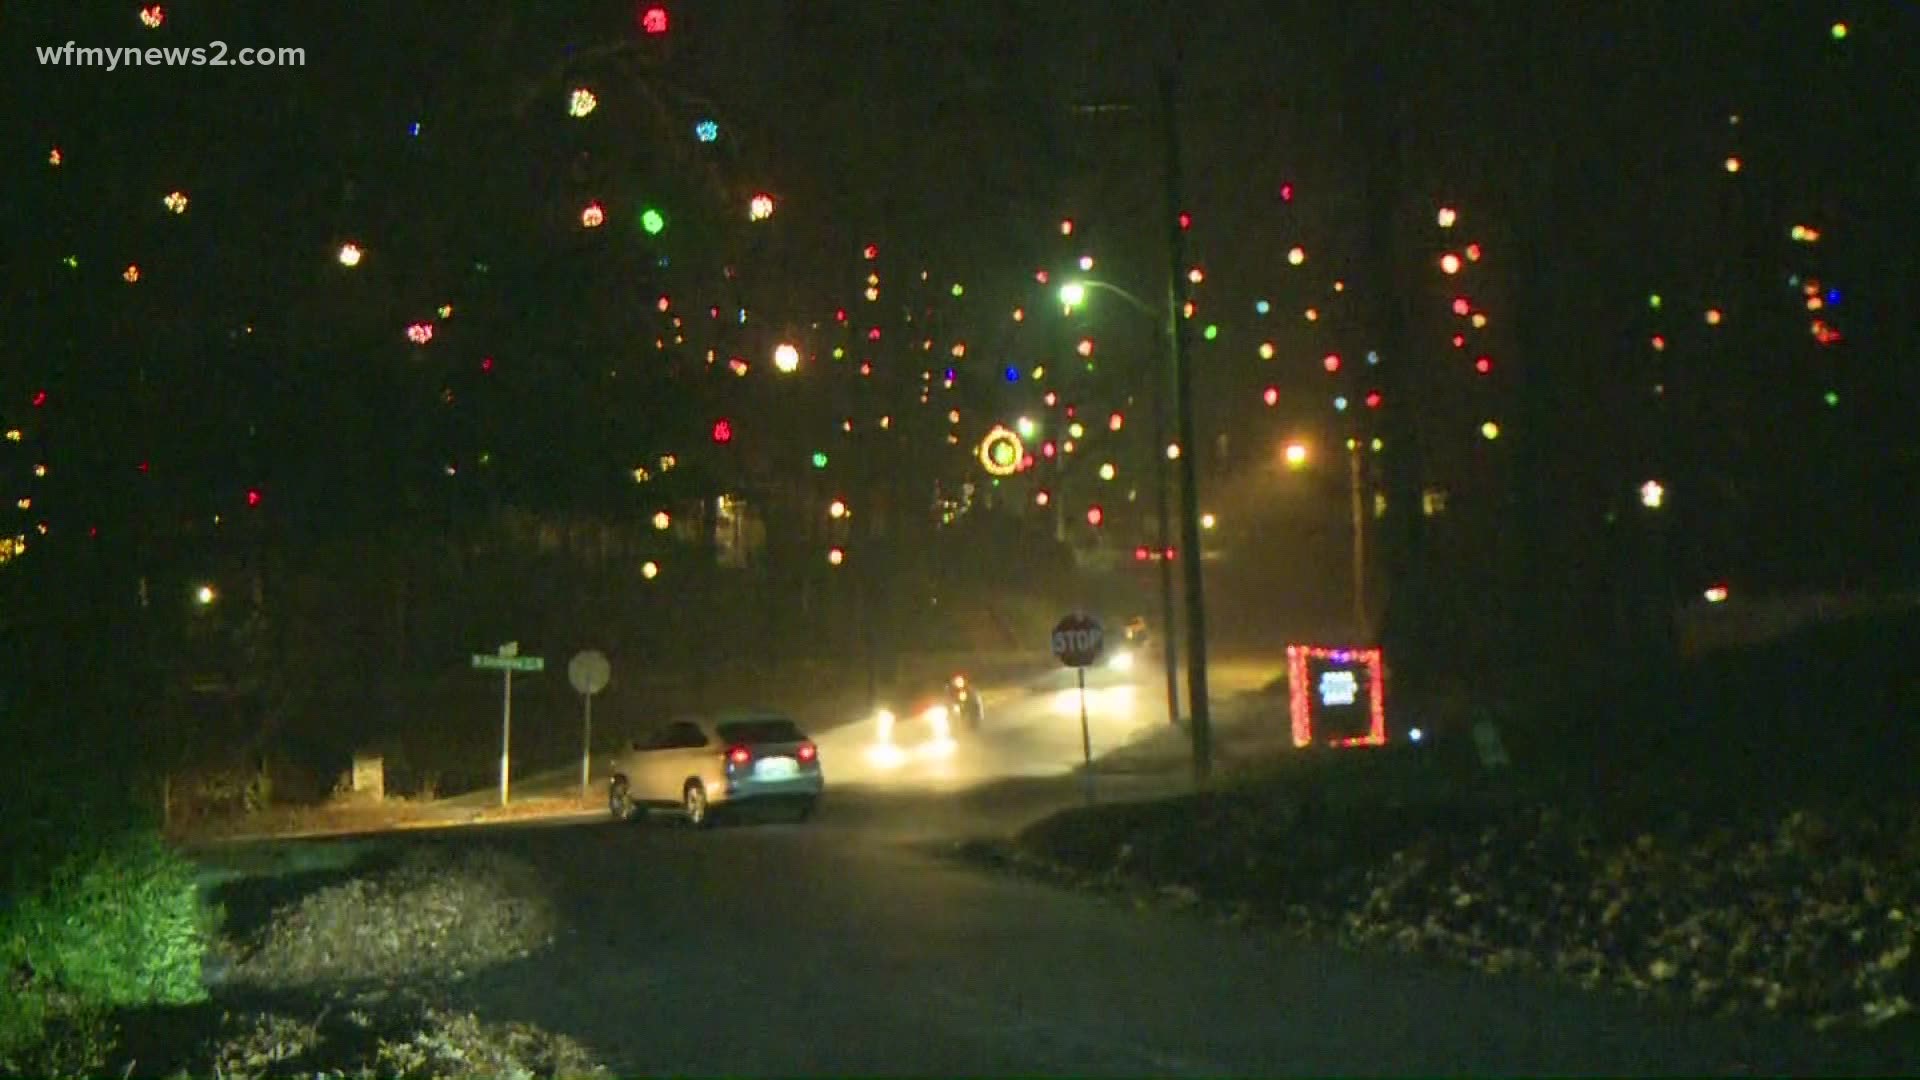 The Sunset Hills neighborhood put up its famous holiday decorations - the ball lights. The 5K that goes along with it starts on December 3.